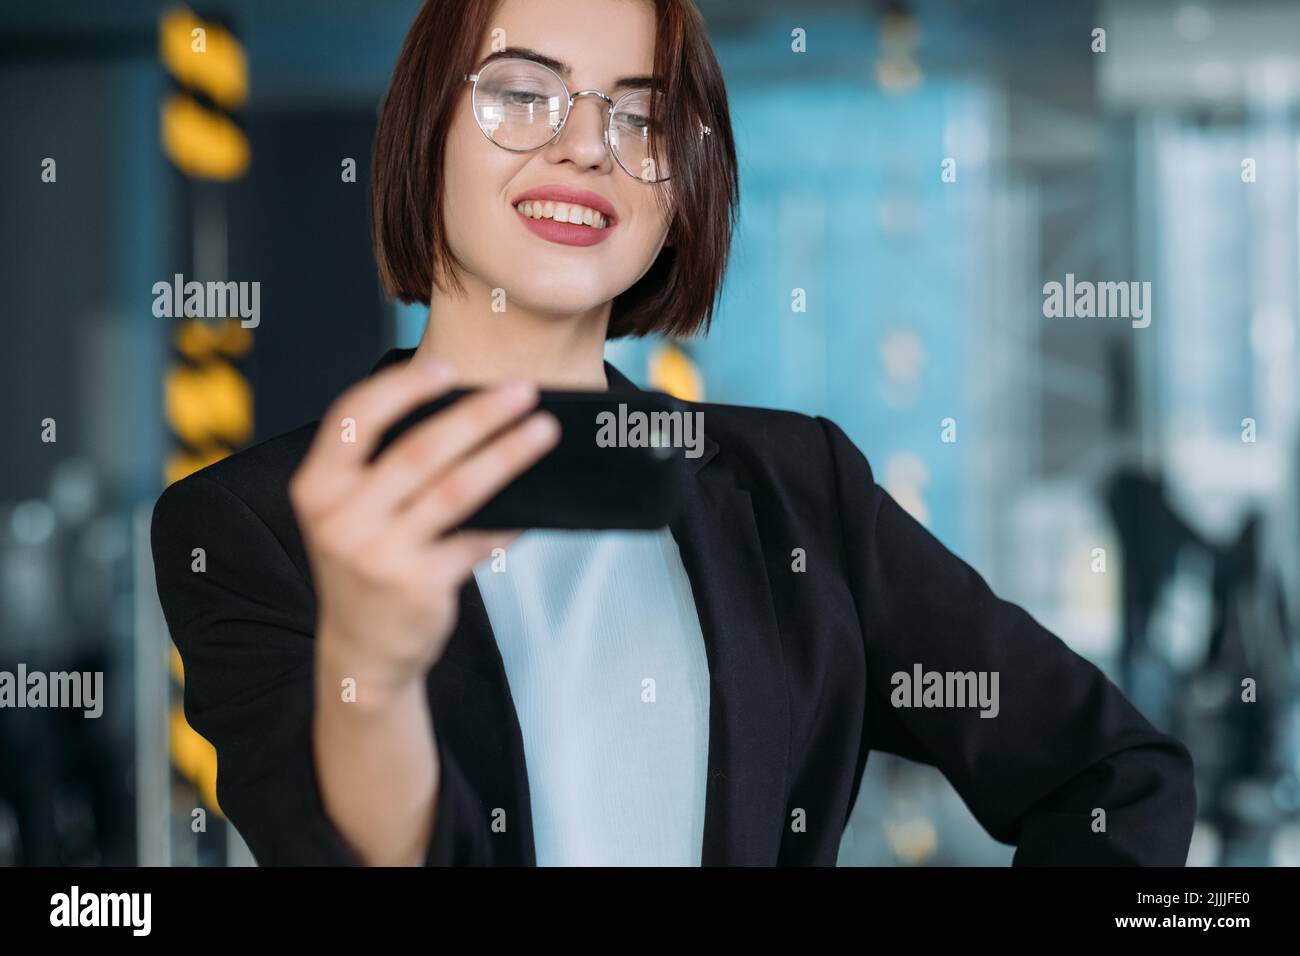 confident business lady office workspace selfie Stock Photo